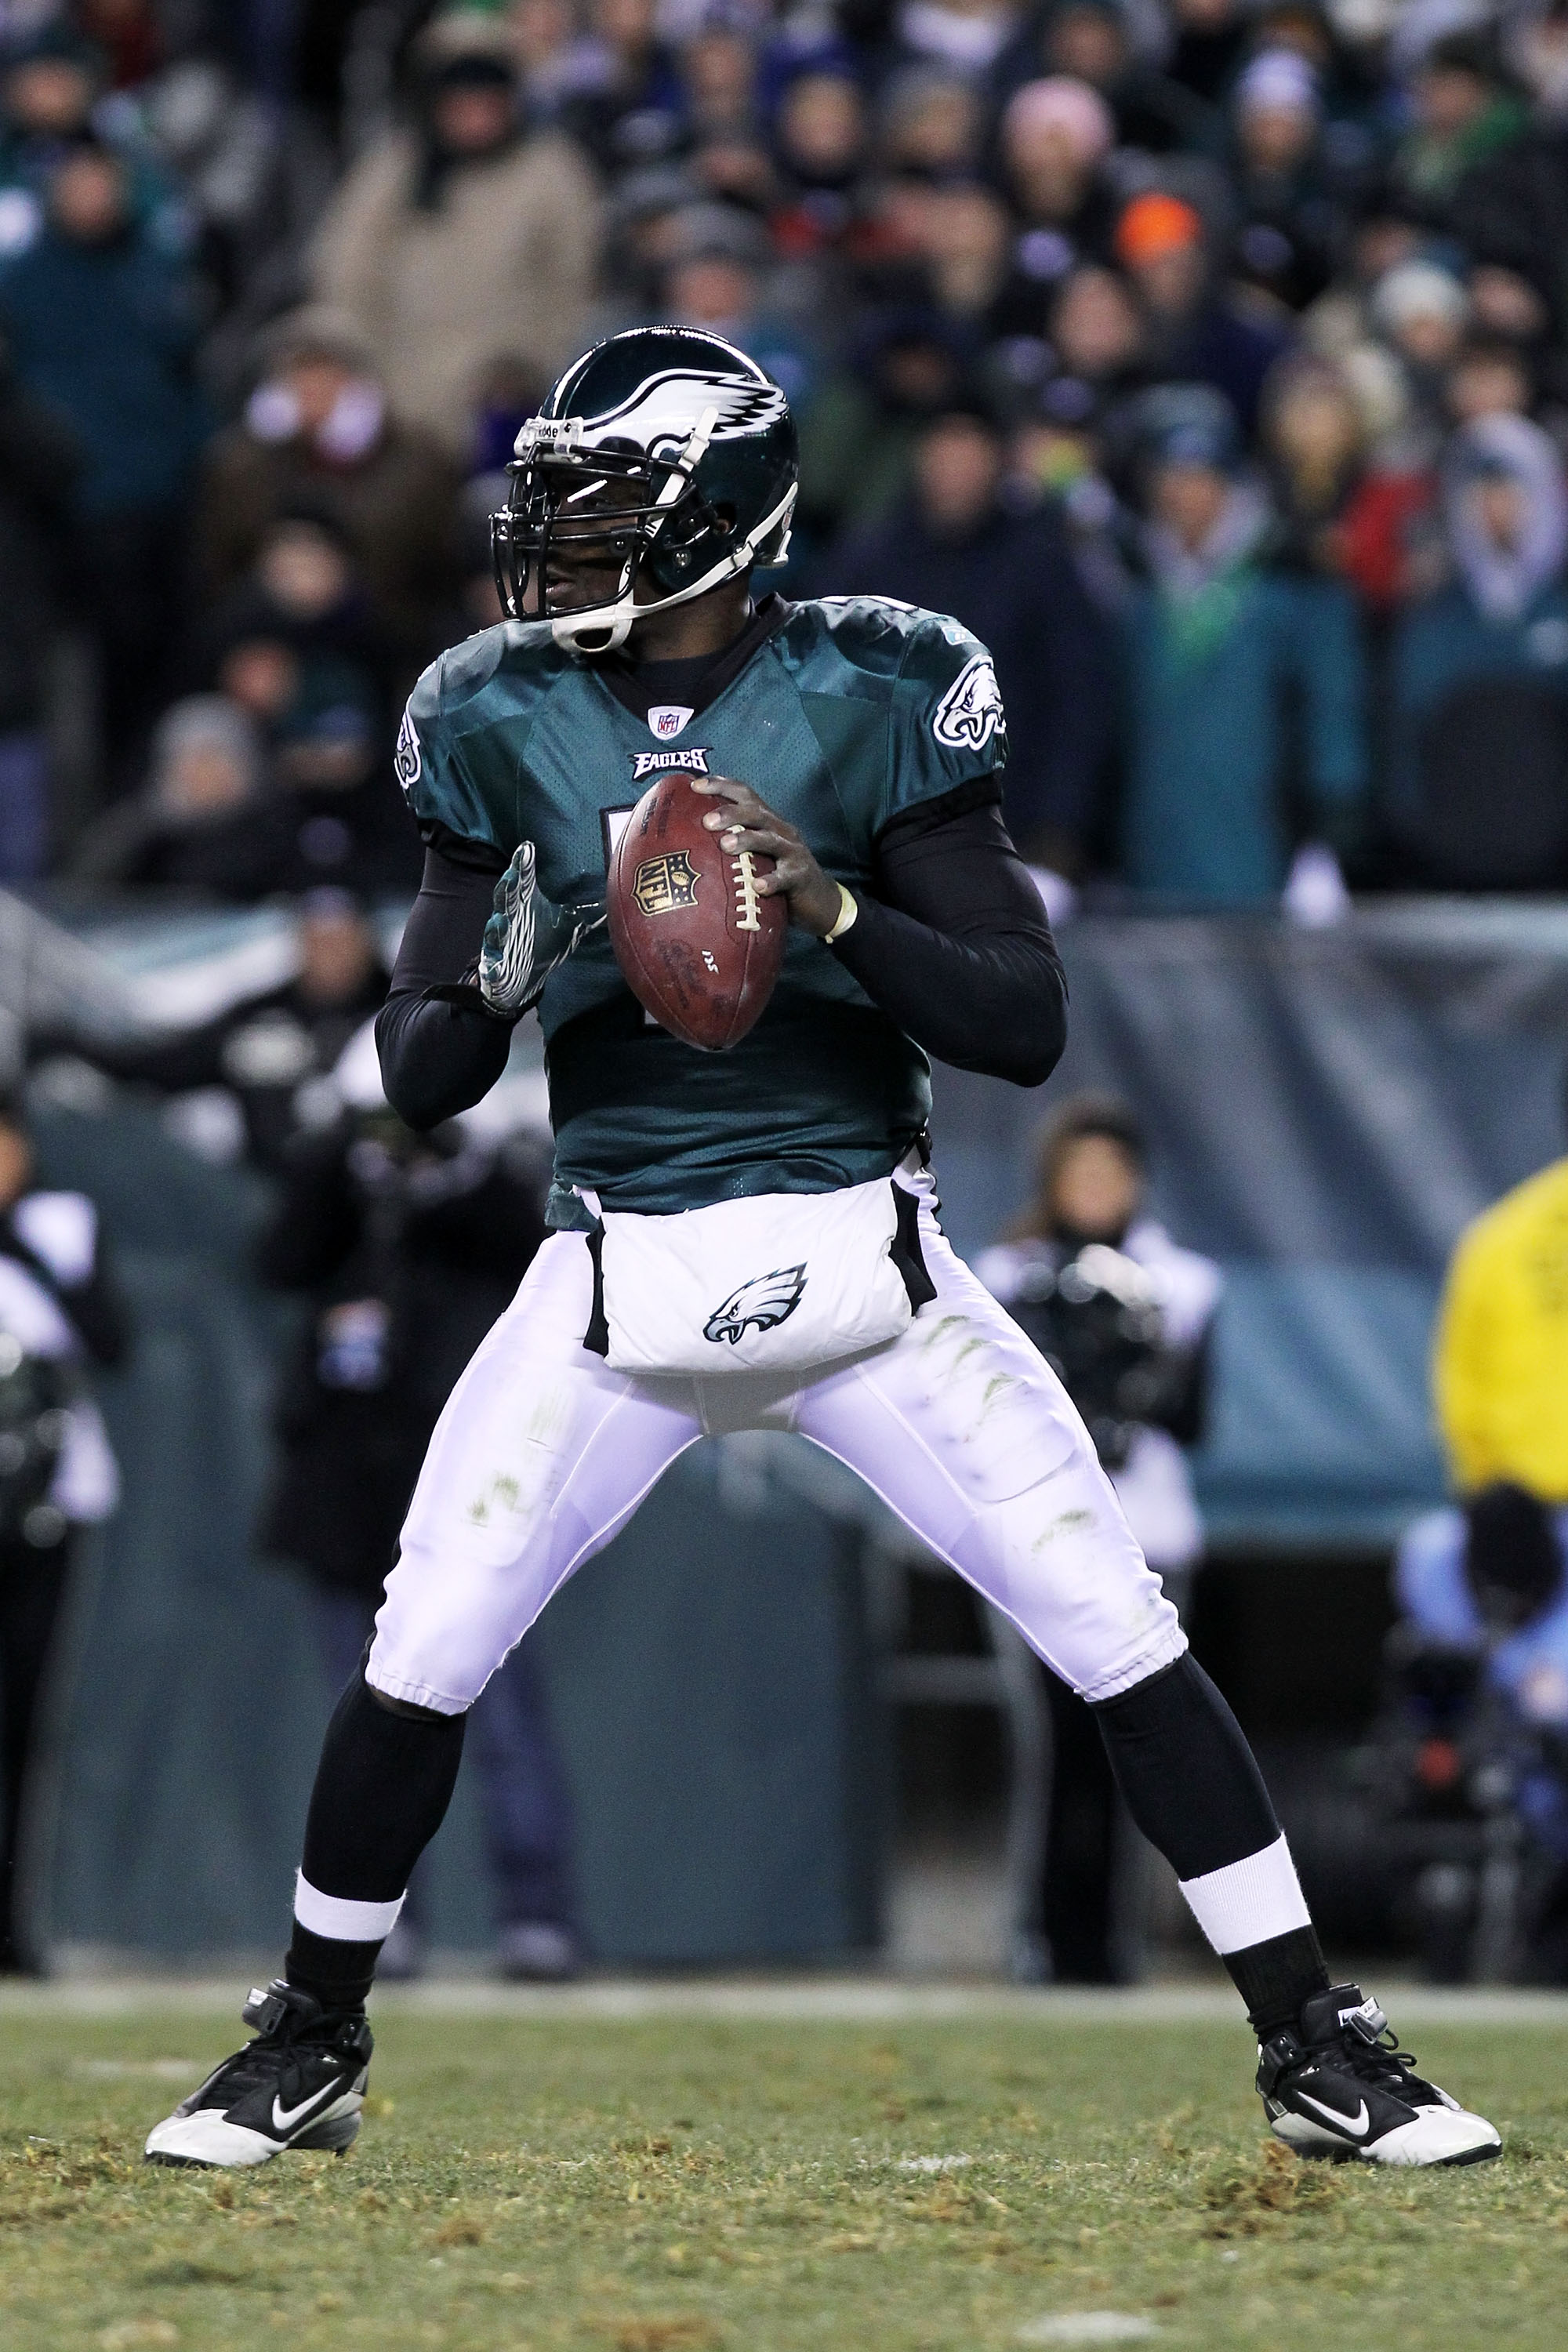 PHILADELPHIA, PA - JANUARY 09:  Michael Vick #7 of the Philadelphia Eagles drops back against the Green Bay Packers during the 2011 NFC wild card playoff game at Lincoln Financial Field on January 9, 2011 in Philadelphia, Pennsylvania.  (Photo by Nick Lah